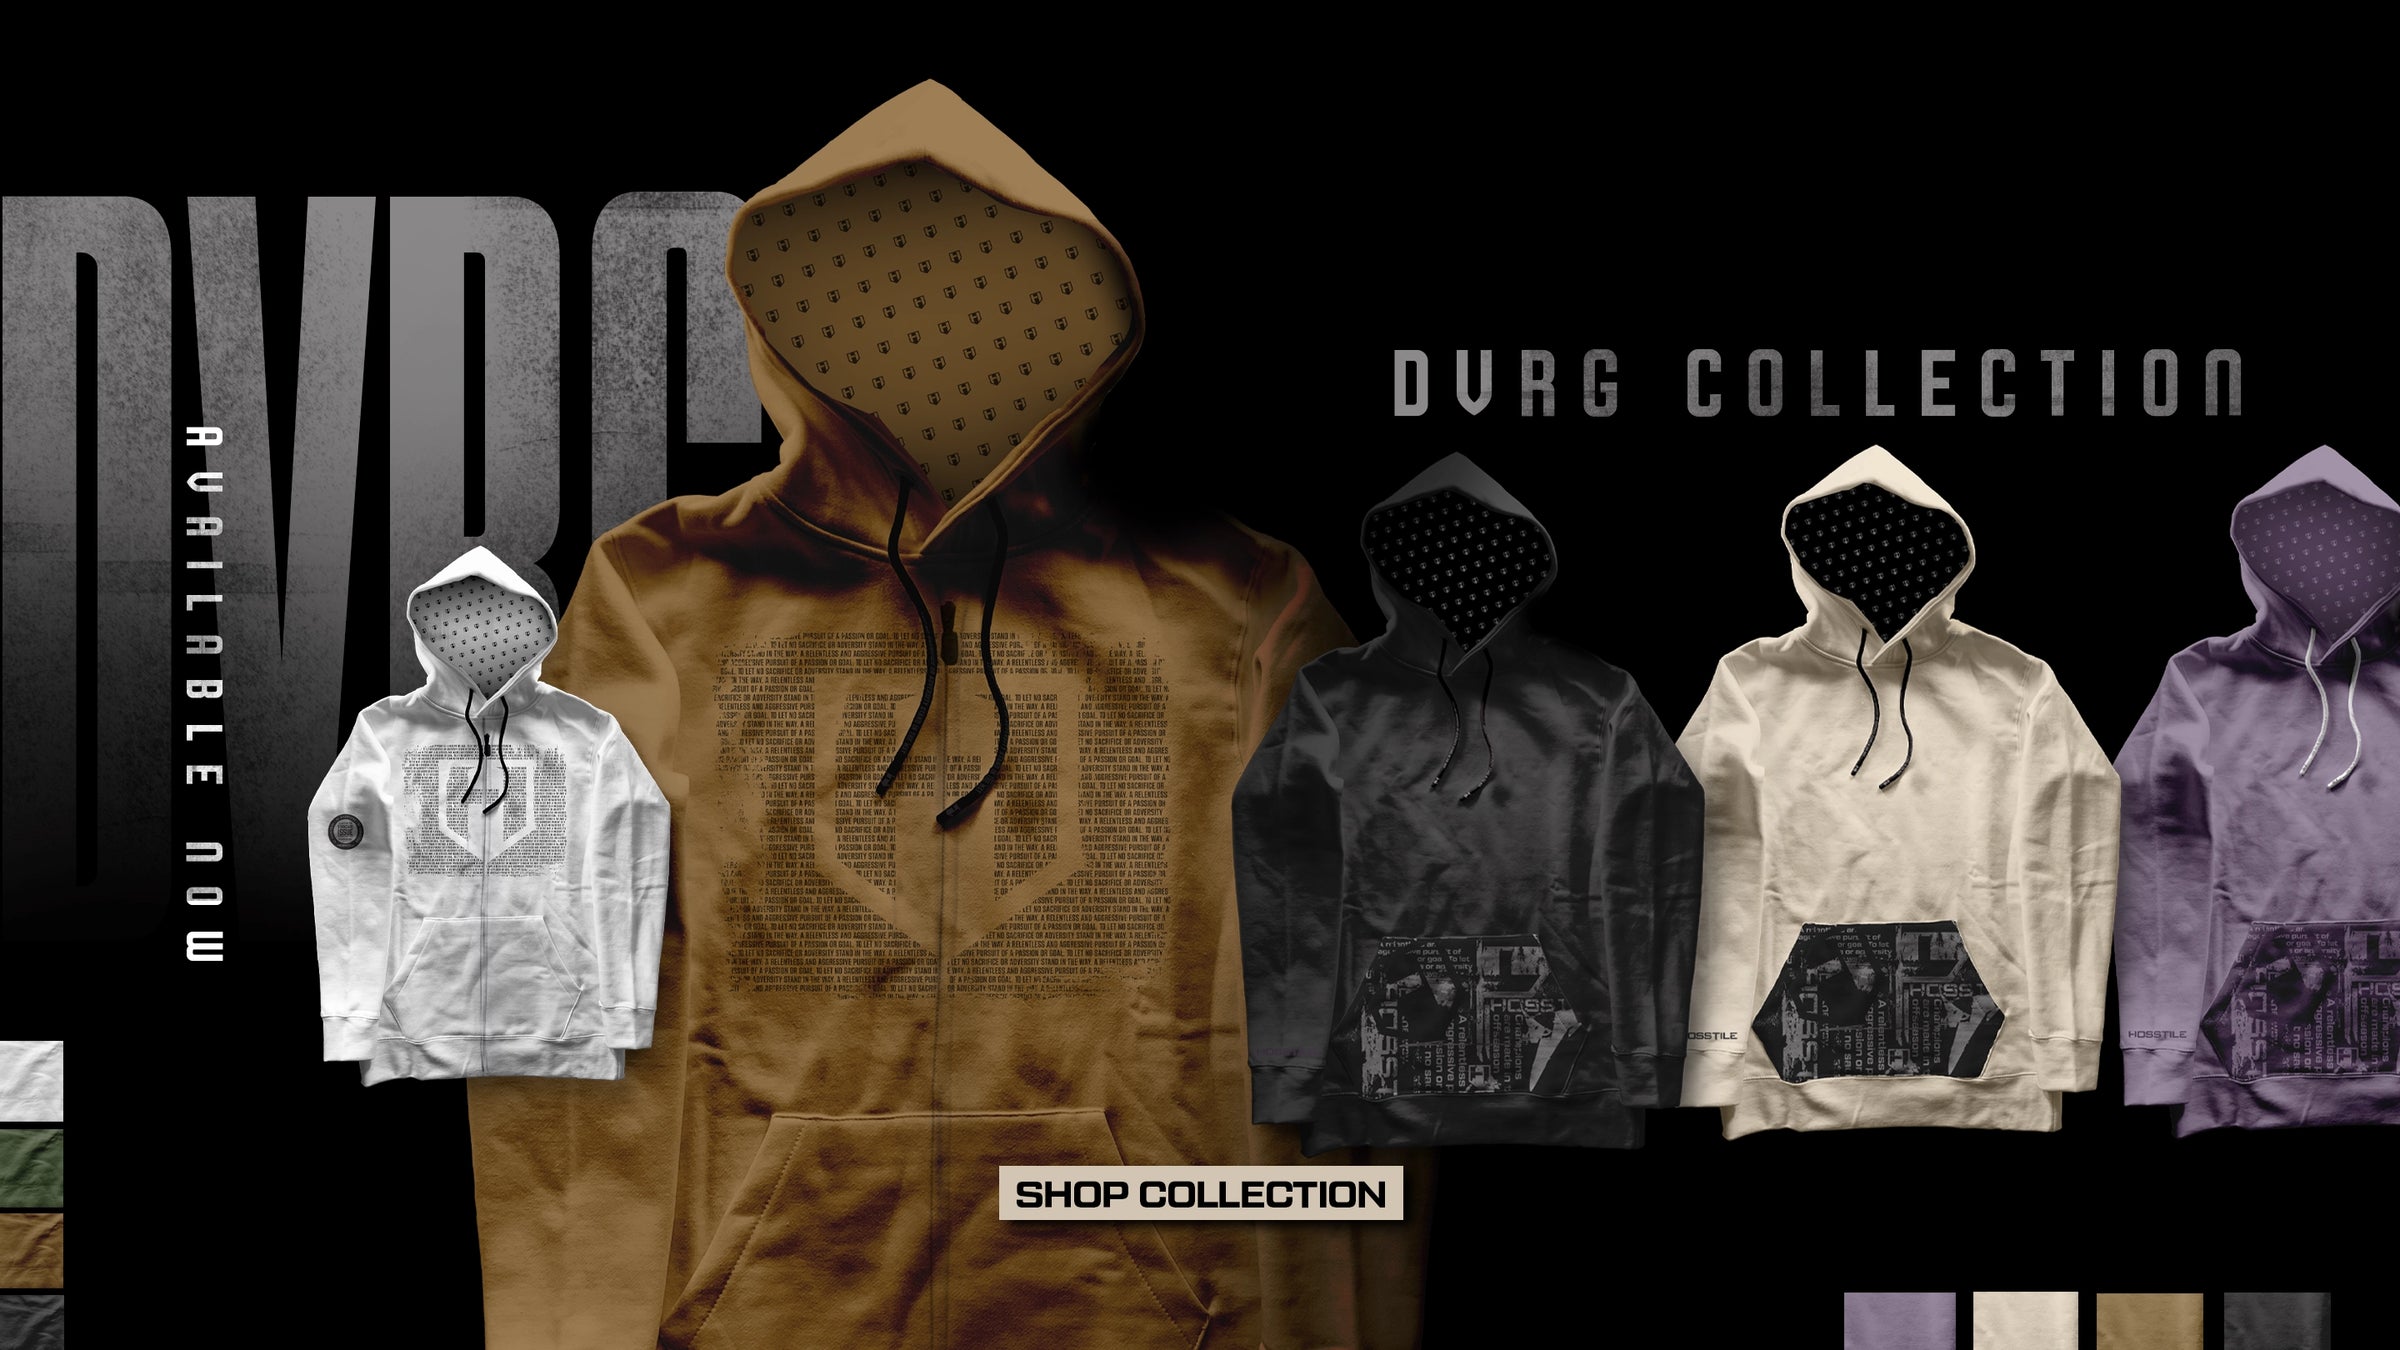 New DVRG Collection of workout hoodies